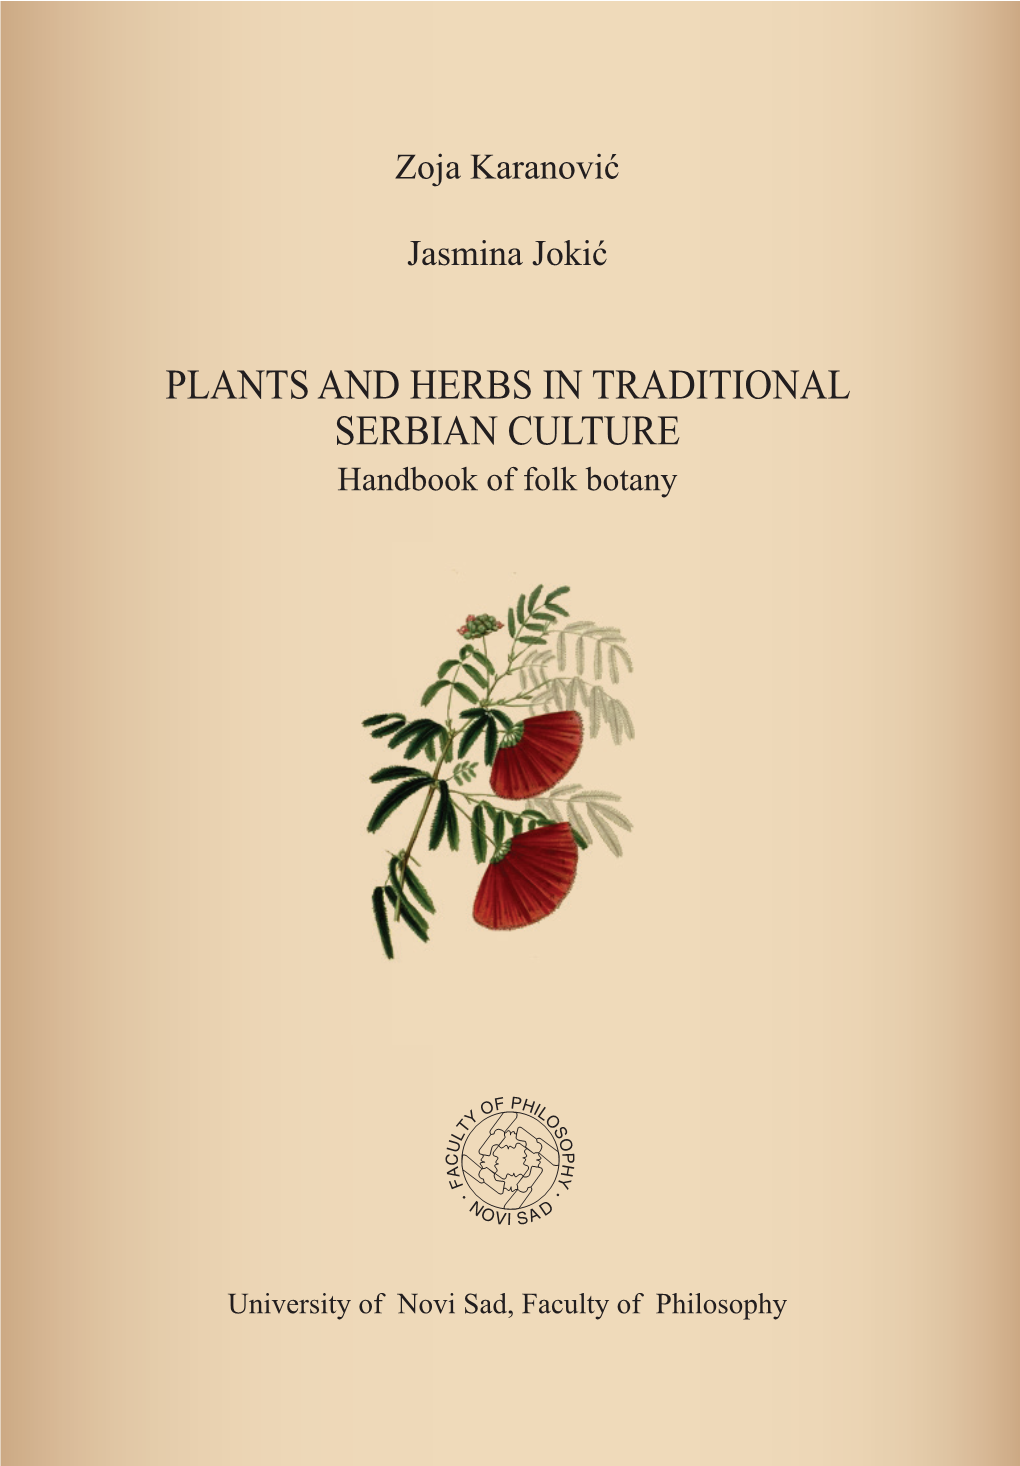 PLANTS and HERBS in TRADITIONAL SERBIAN CULTURE Handbook of Folk Botany